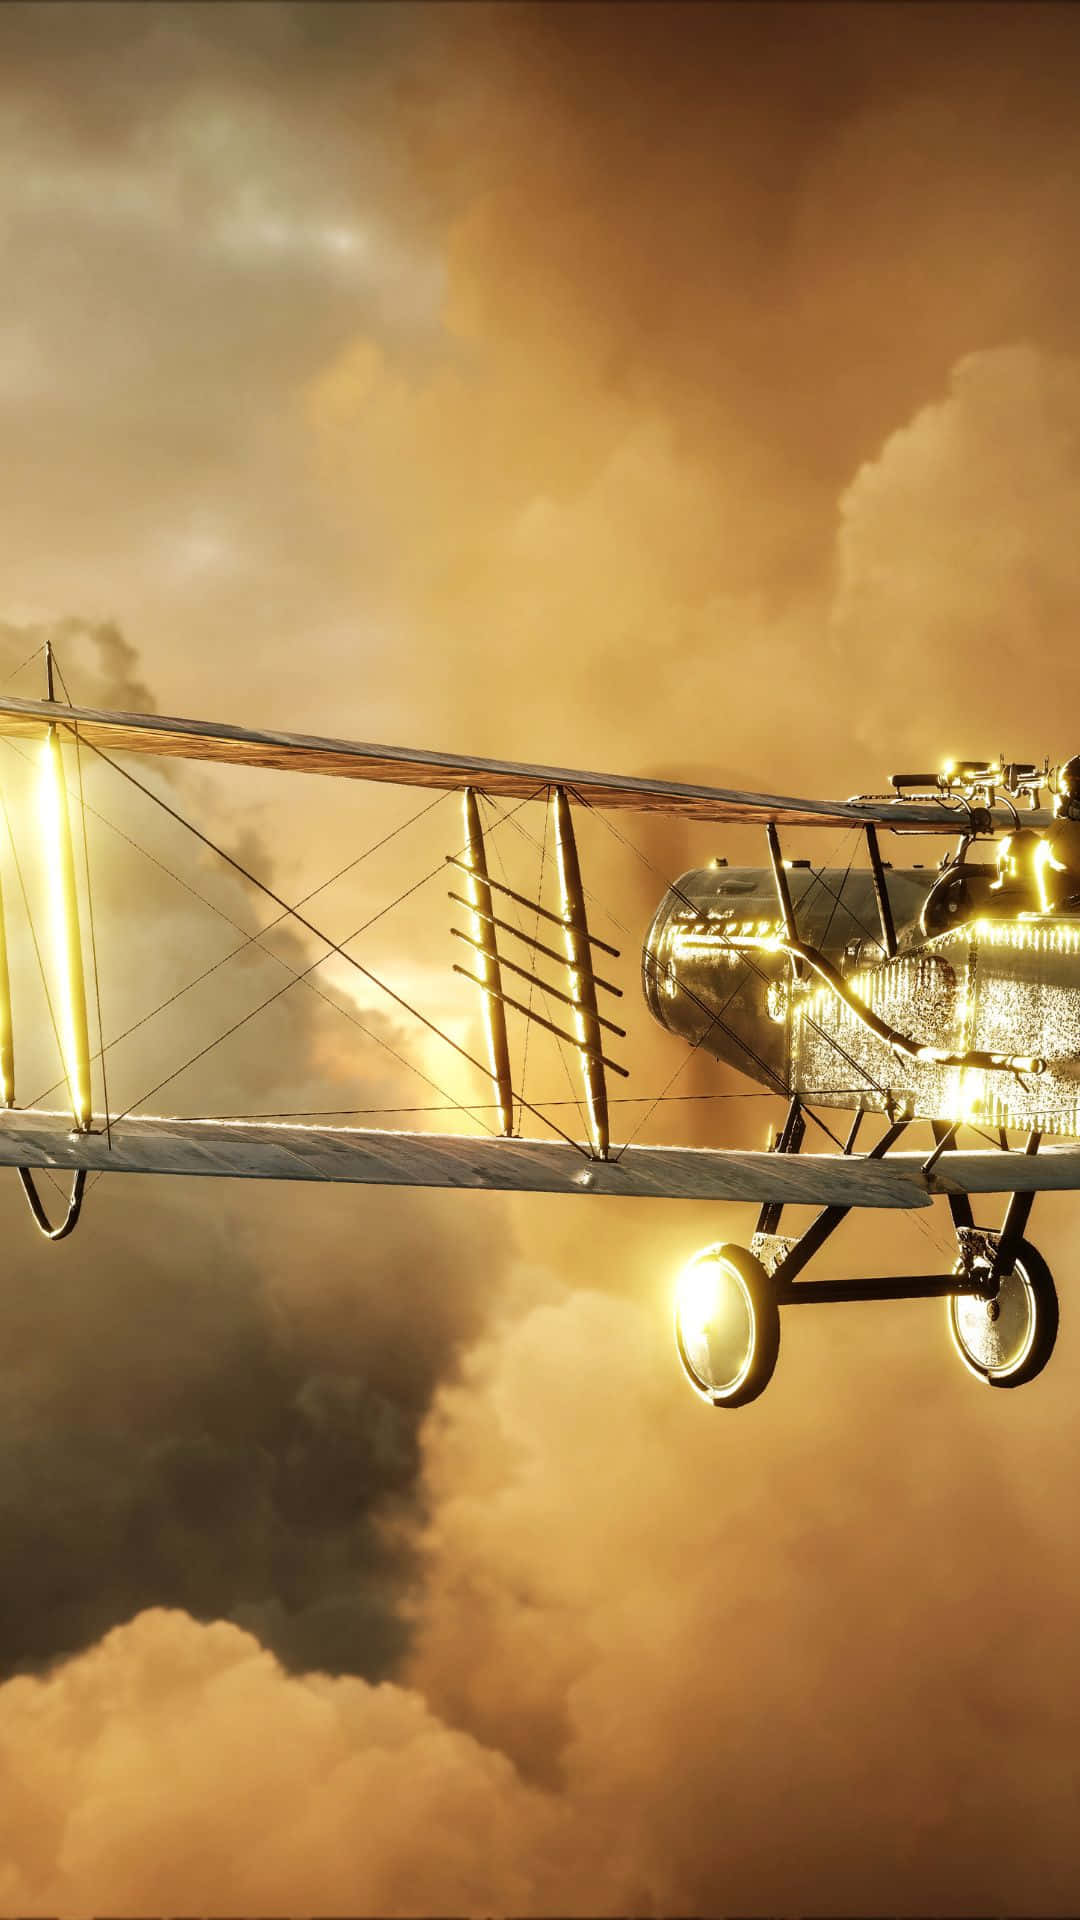 Android Battlefield 1 Background Aircraft Flying